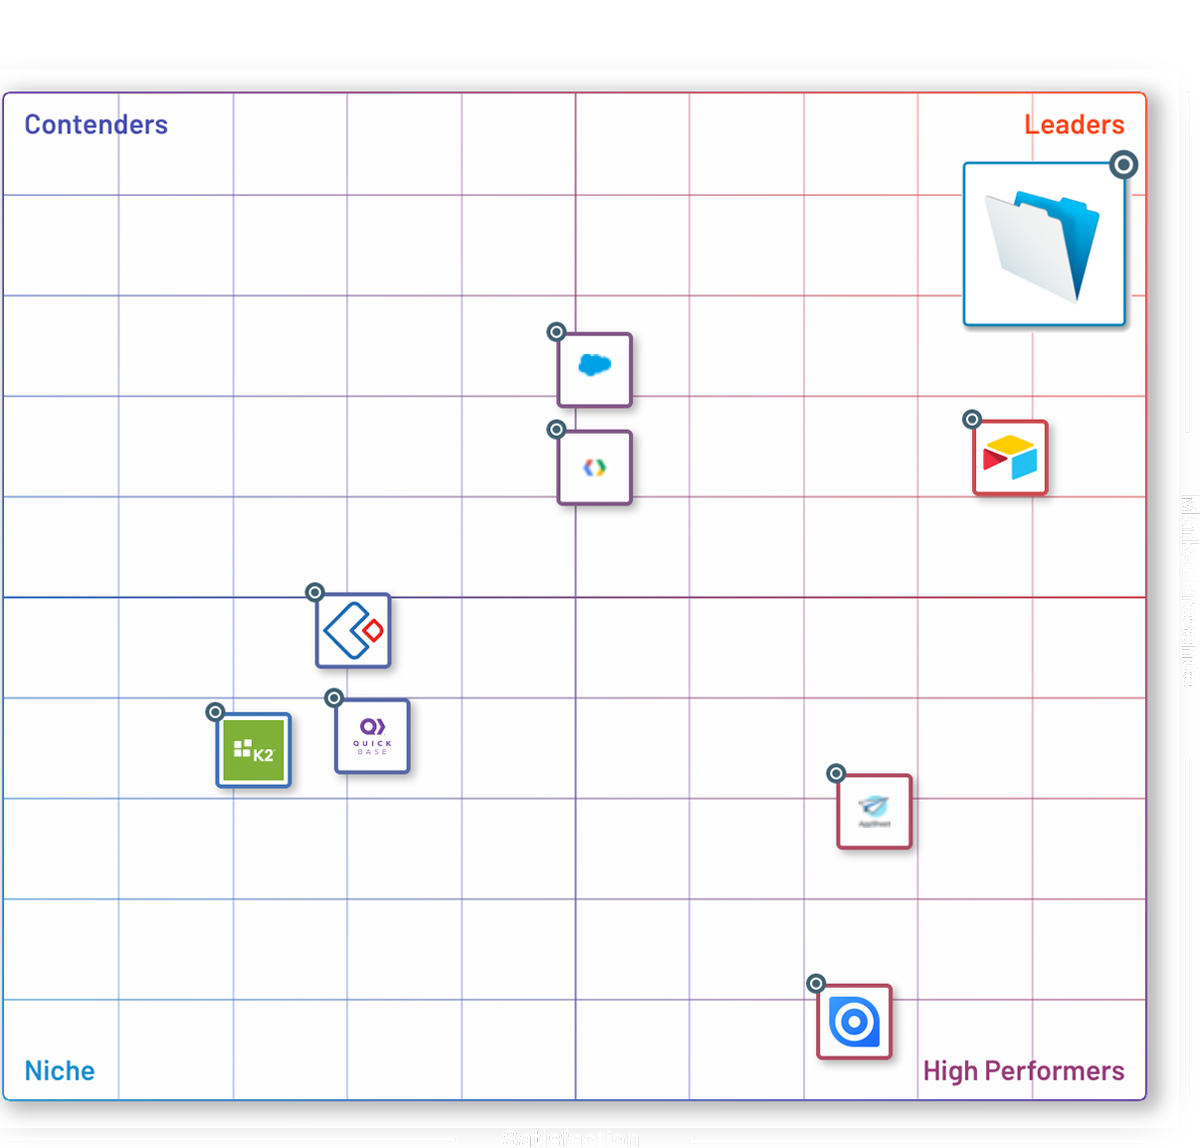 G2 Crowd Grid® for Workplace Innovation Platforms